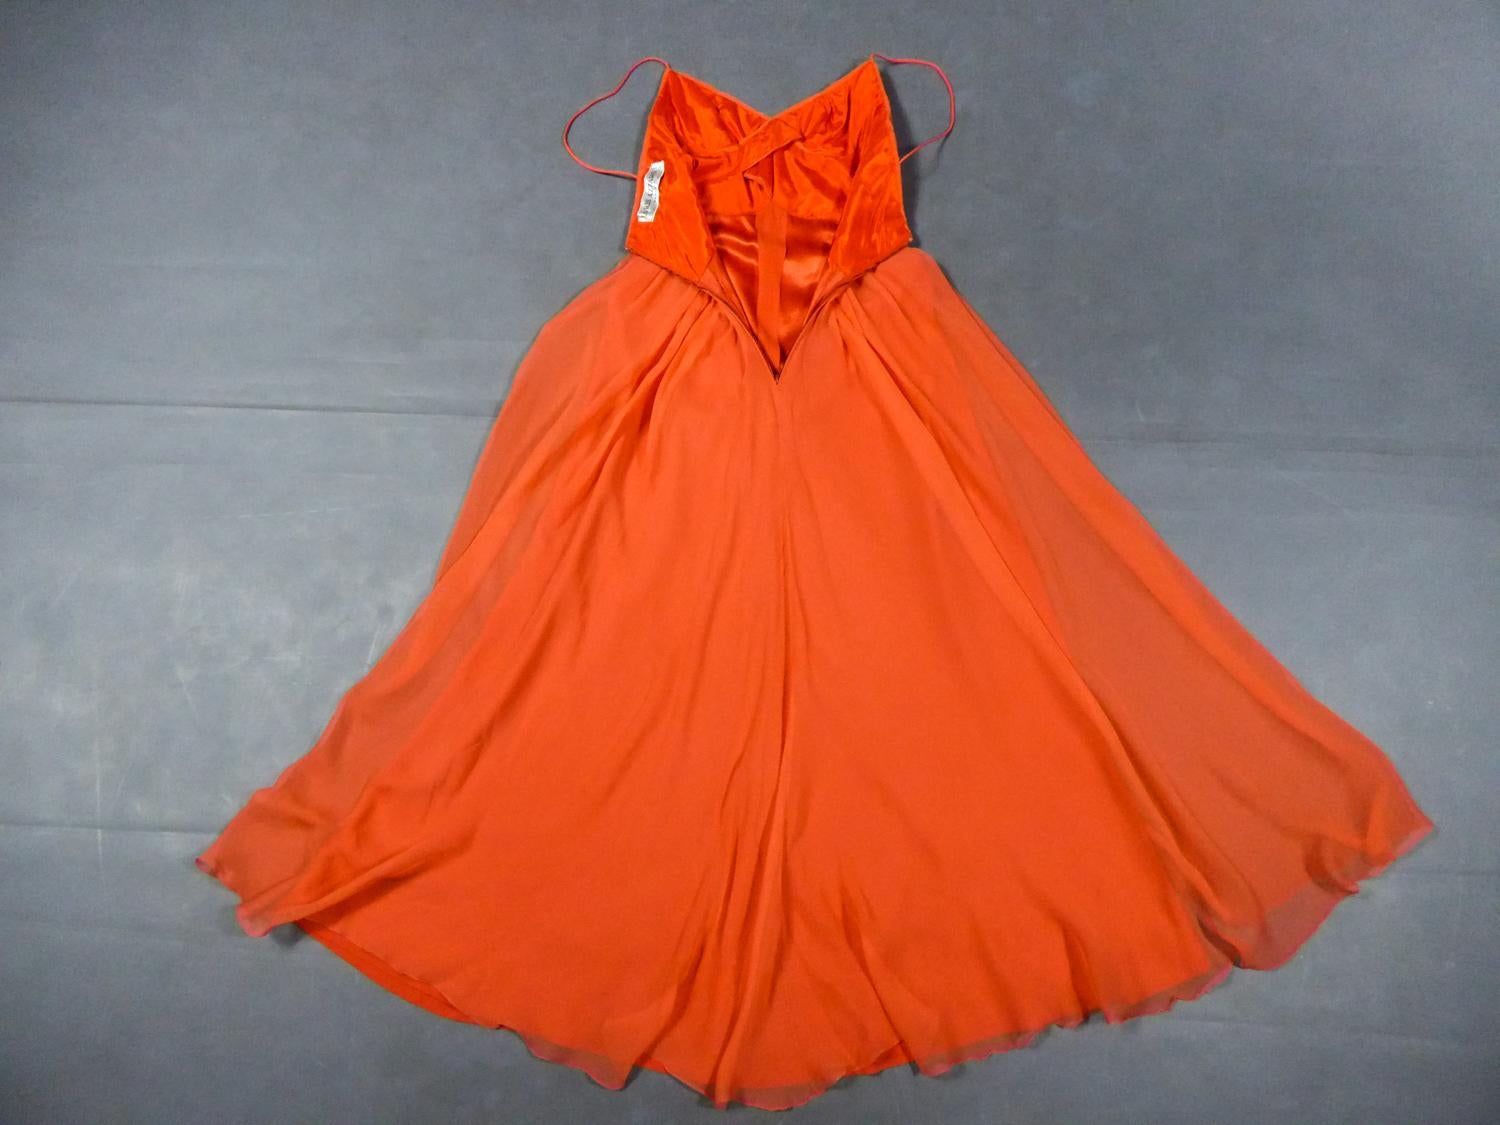 Circa 1980
France

Evening dress in orange silk crepe by Loris Azzaro Haute Couture and dating from the 1990s. Sleeveless dress with thin straps and large cleavage. High-waisted bustier with pleated work by crossed tabs highlighting the chest. Large